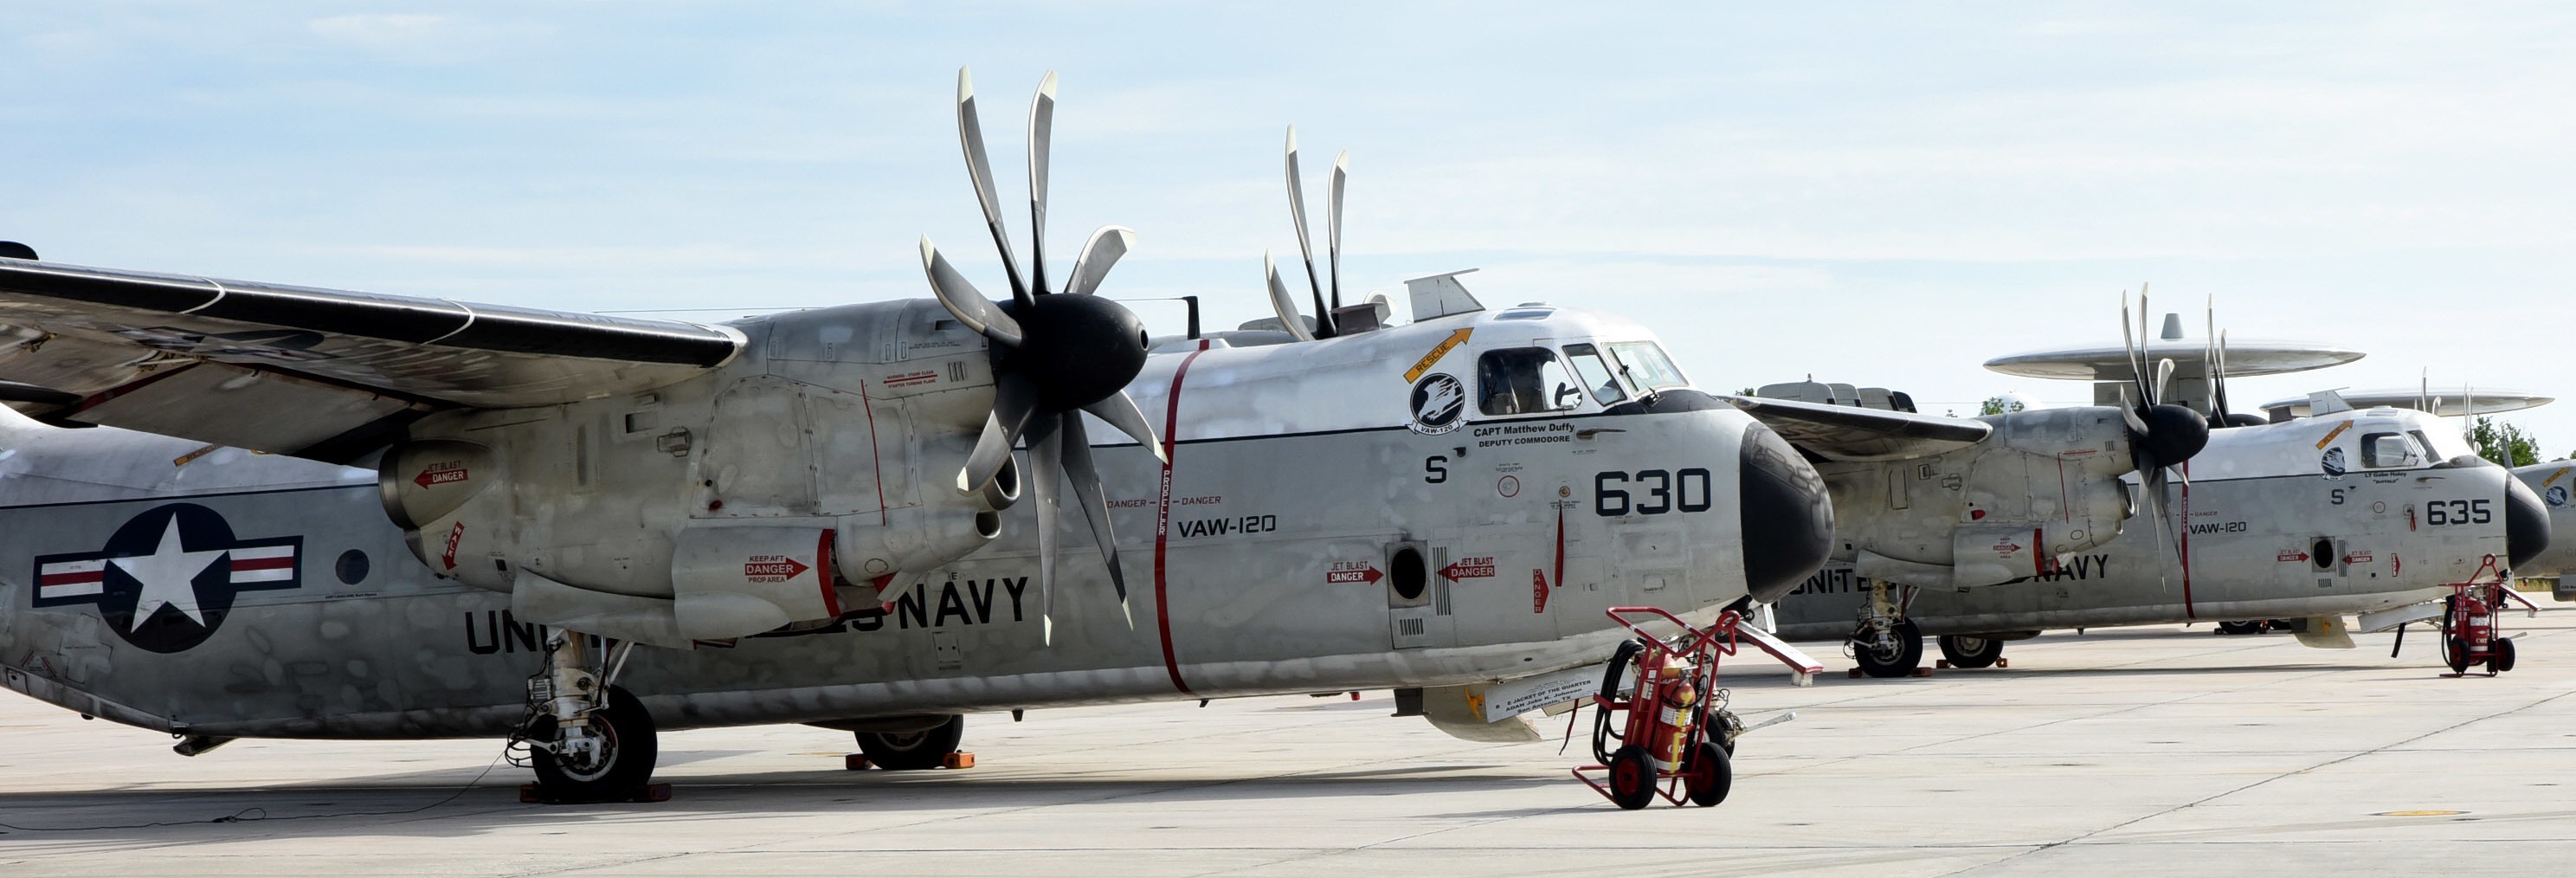 vaw-120 greyhawks carrier airborne early warning squadron c-2a greyhound replacement nas key west florida 6567